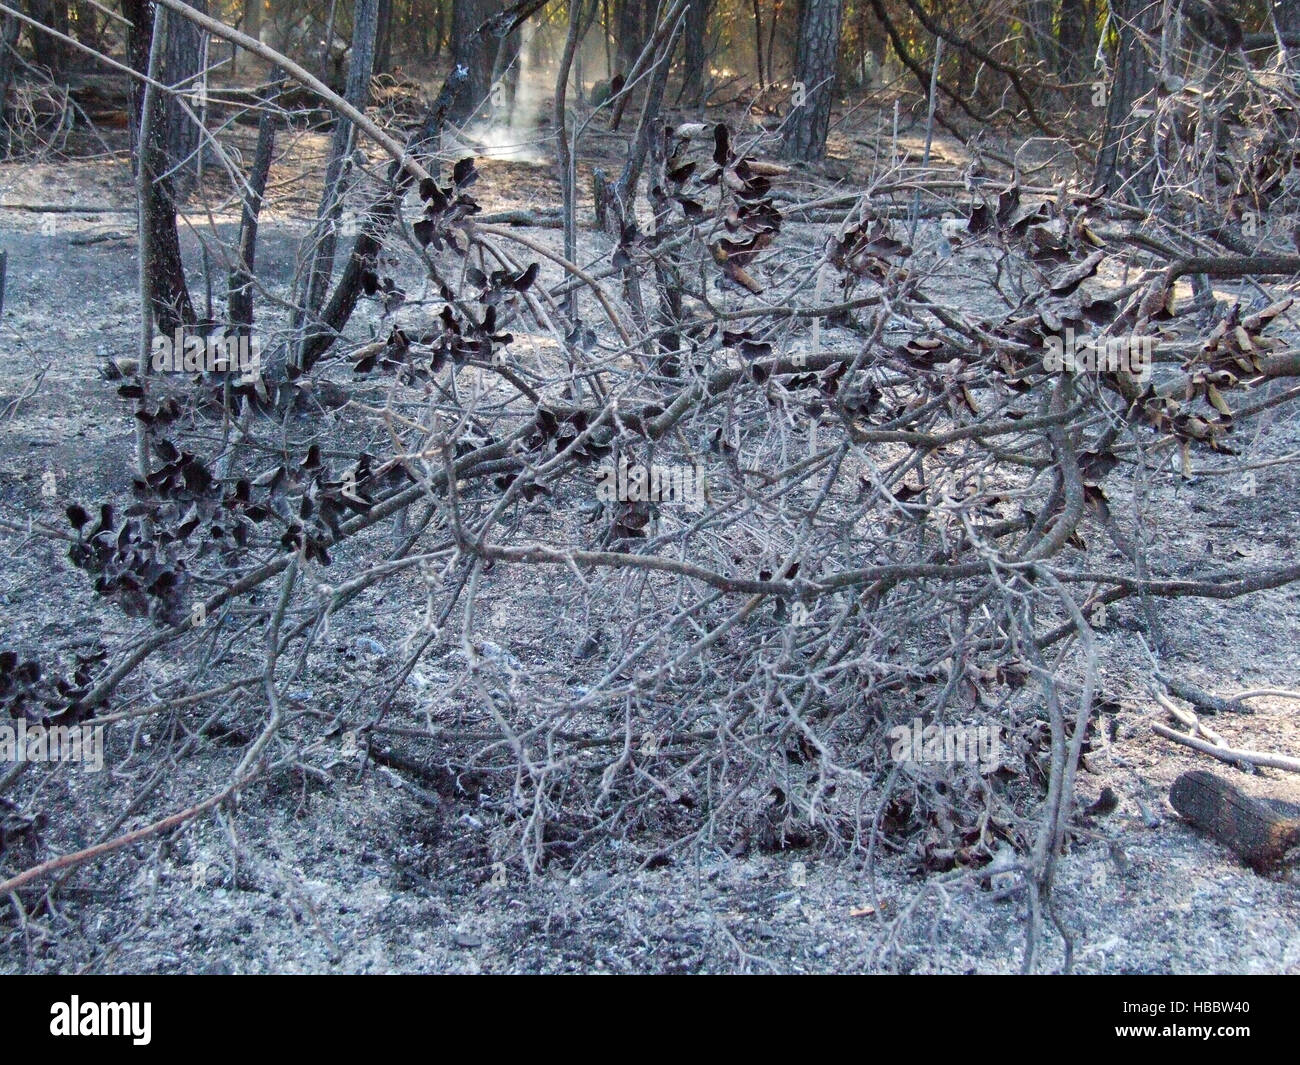 Burnt trees after a forest fire Stock Photo